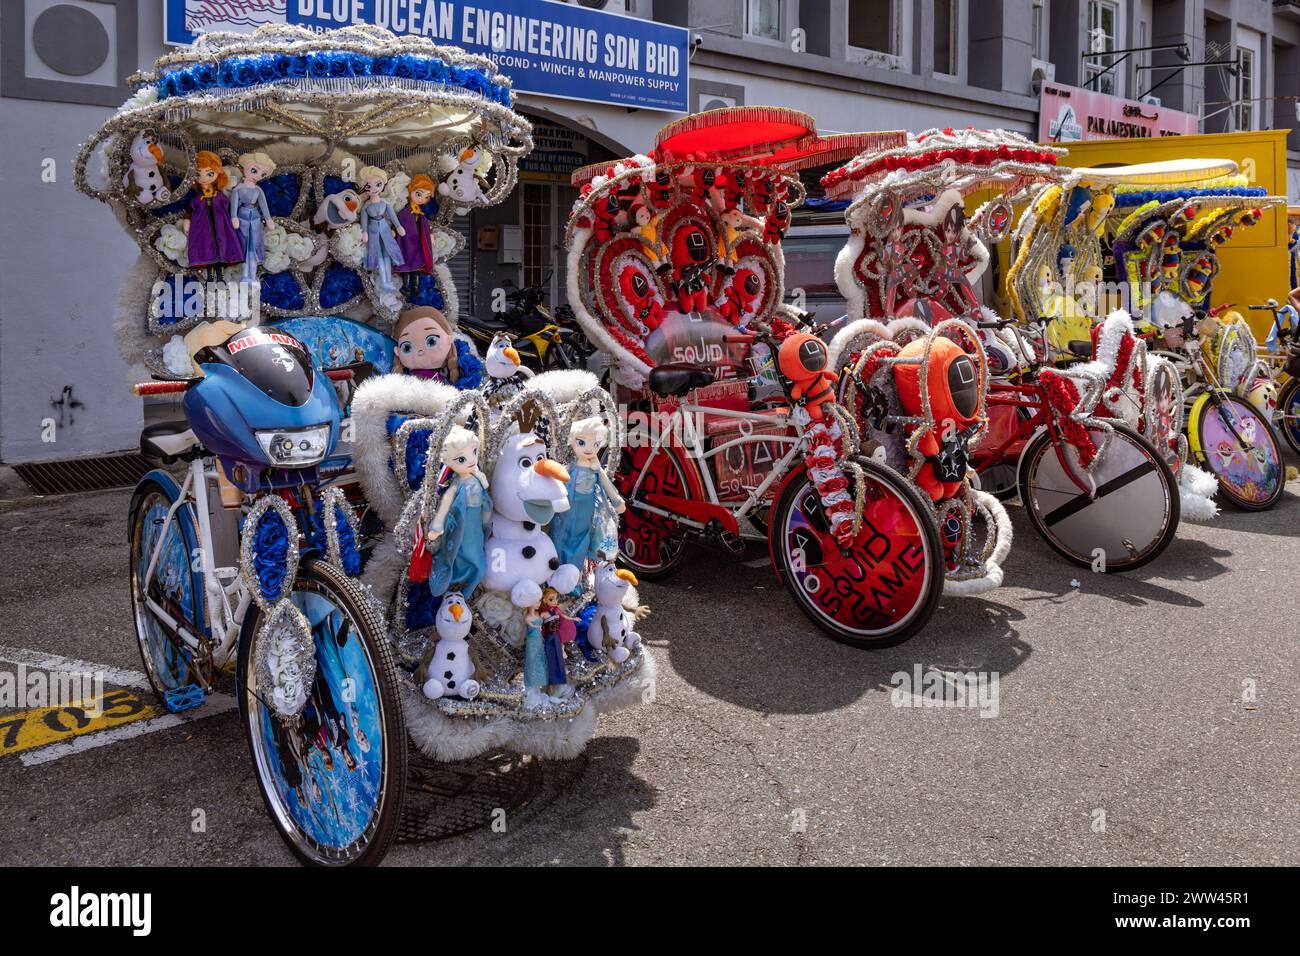 Trishaws, or cycle rikshaws, decorated with popular film and cartoon characters and waiting to transport tourists in Malacca, Malaysia Stock Photo